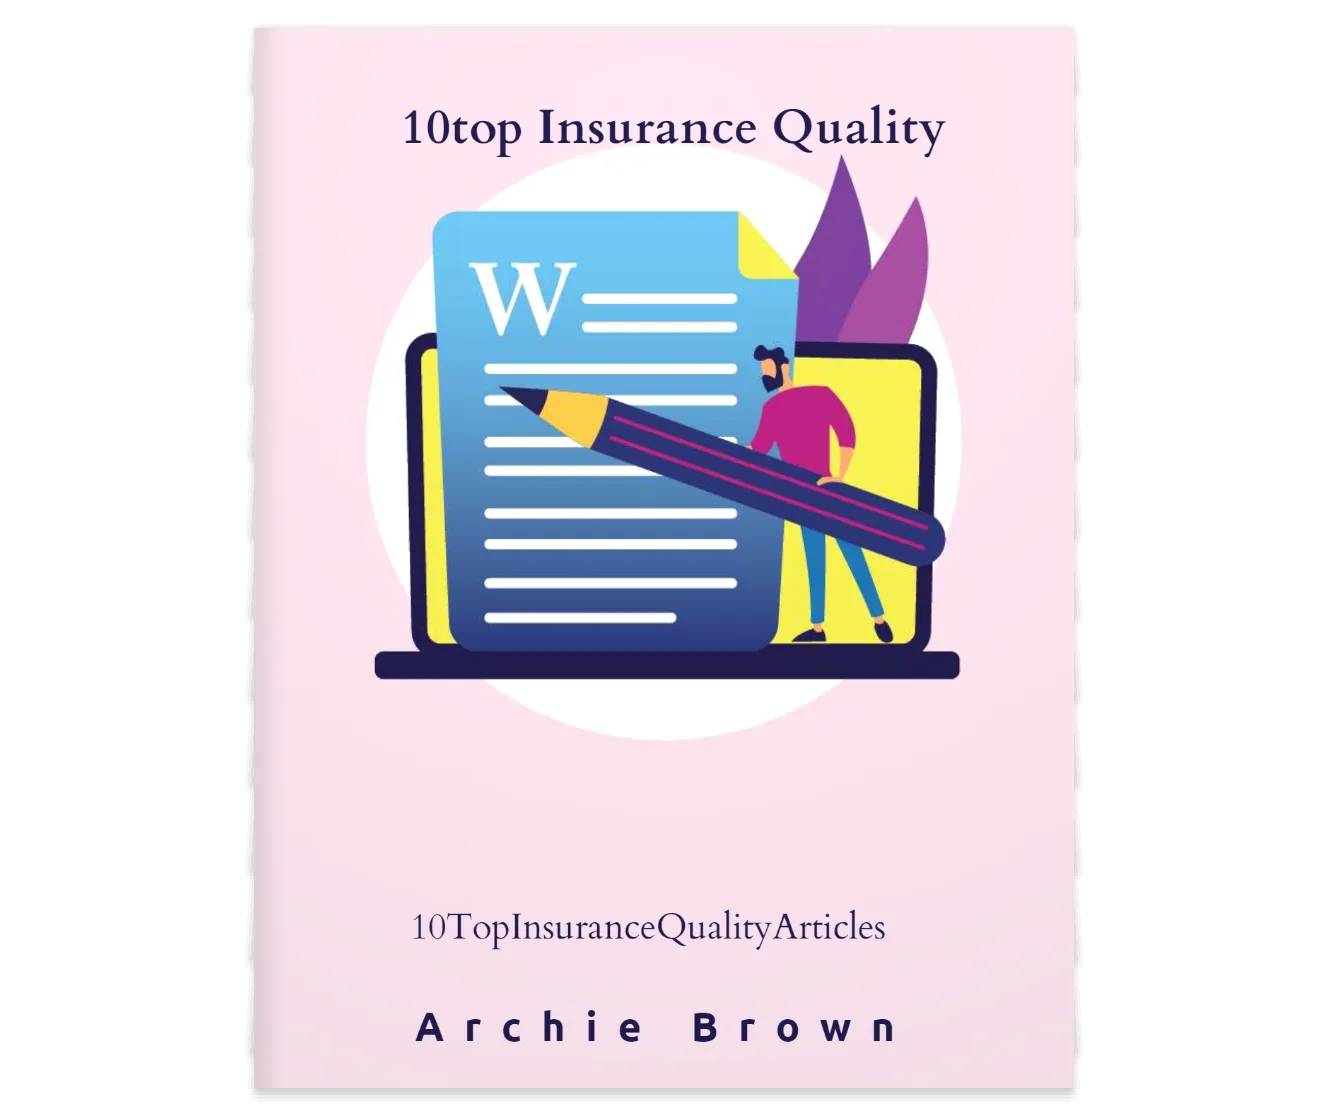 "10 Top Insurance Quality: Secure Your Peace of Mind"